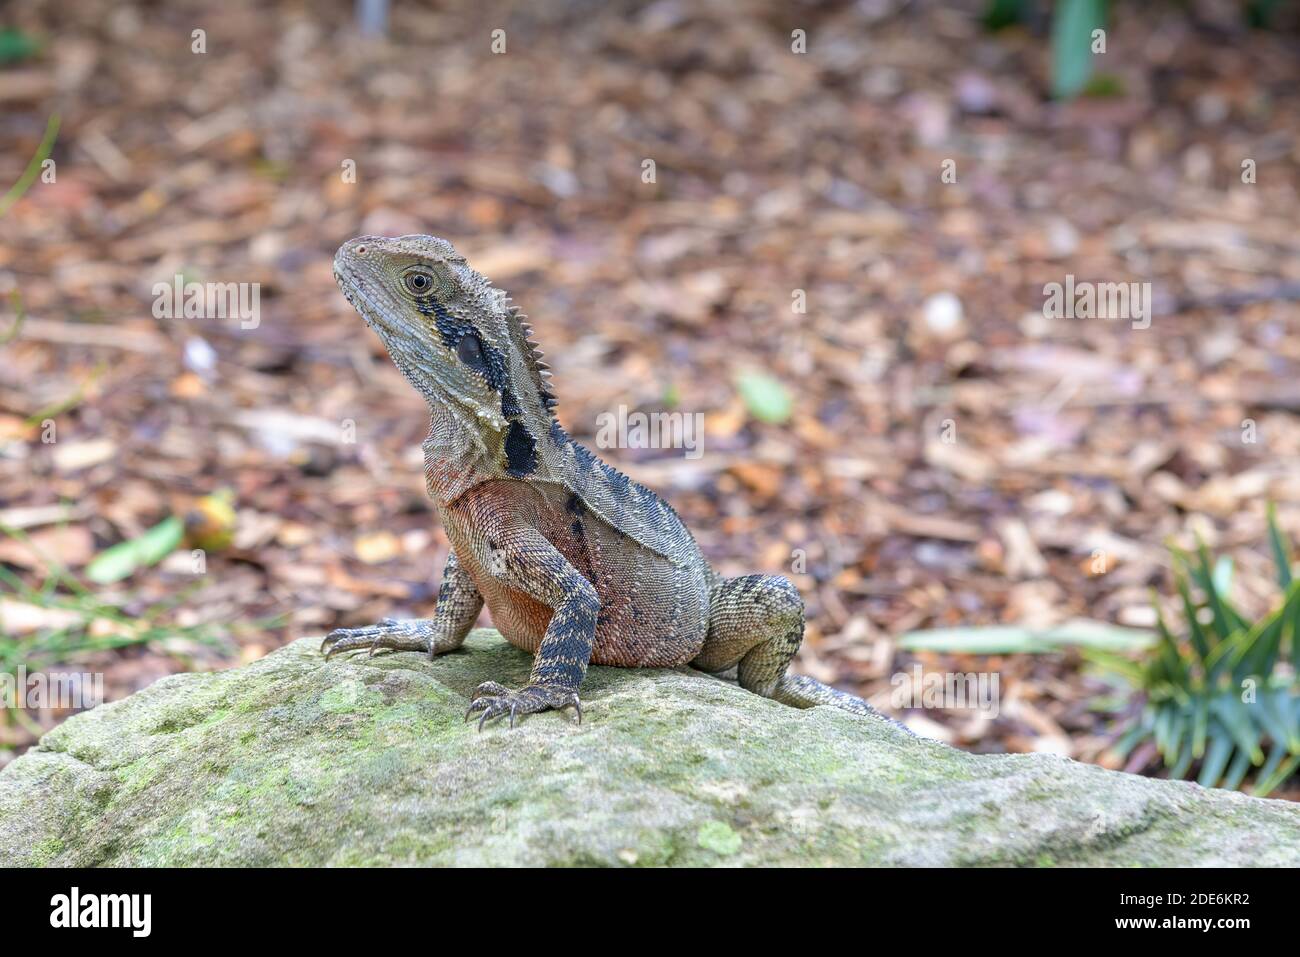 A top view of a male brown eastern water dragon basking on the ground, New South Wales, Australia. Stock Photo